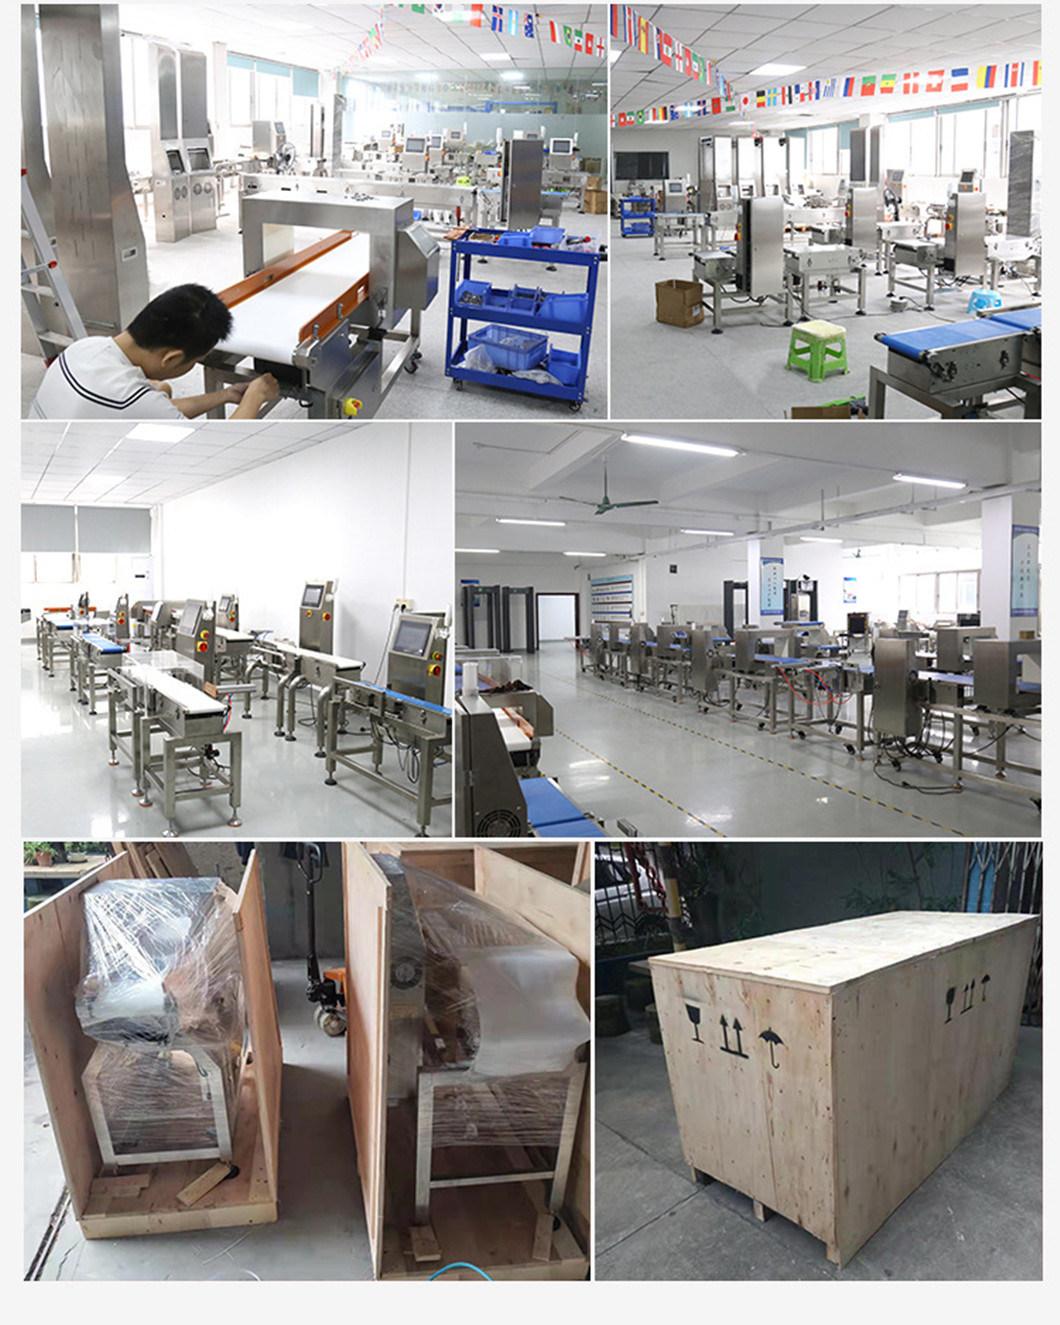 High Accuracy Automatic Check Weigher Machine/Weighing Scale with Rejector Weight Scale Multi-Level Weight Sorting LCD 1500g/10g